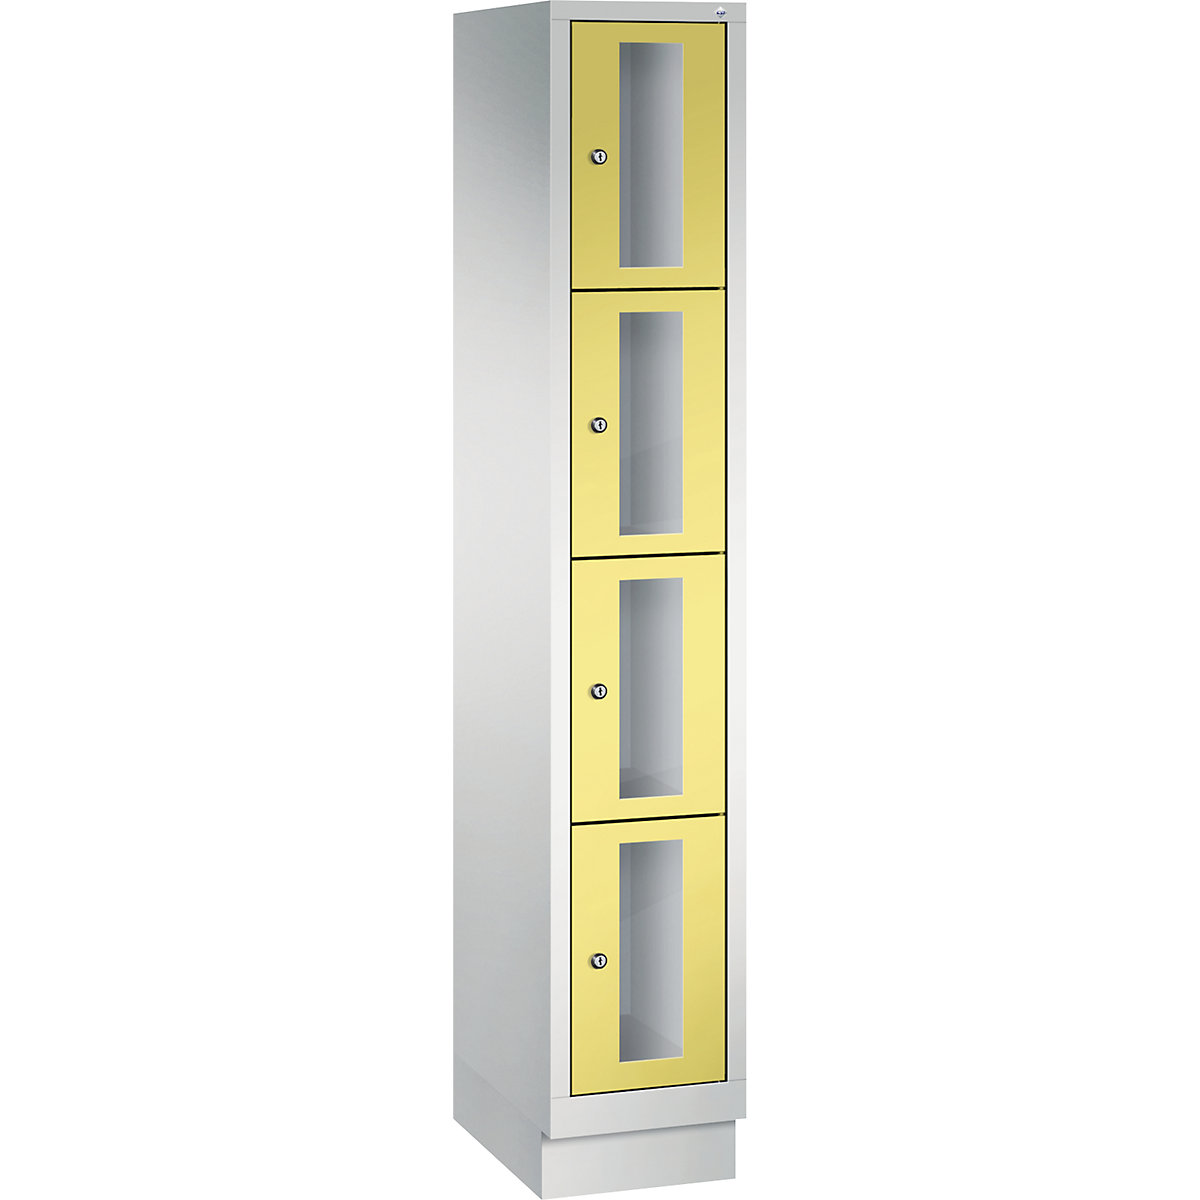 C+P – CLASSIC locker unit, compartment height 375 mm, with plinth, 4 compartments, width 320 mm, sulphur yellow door